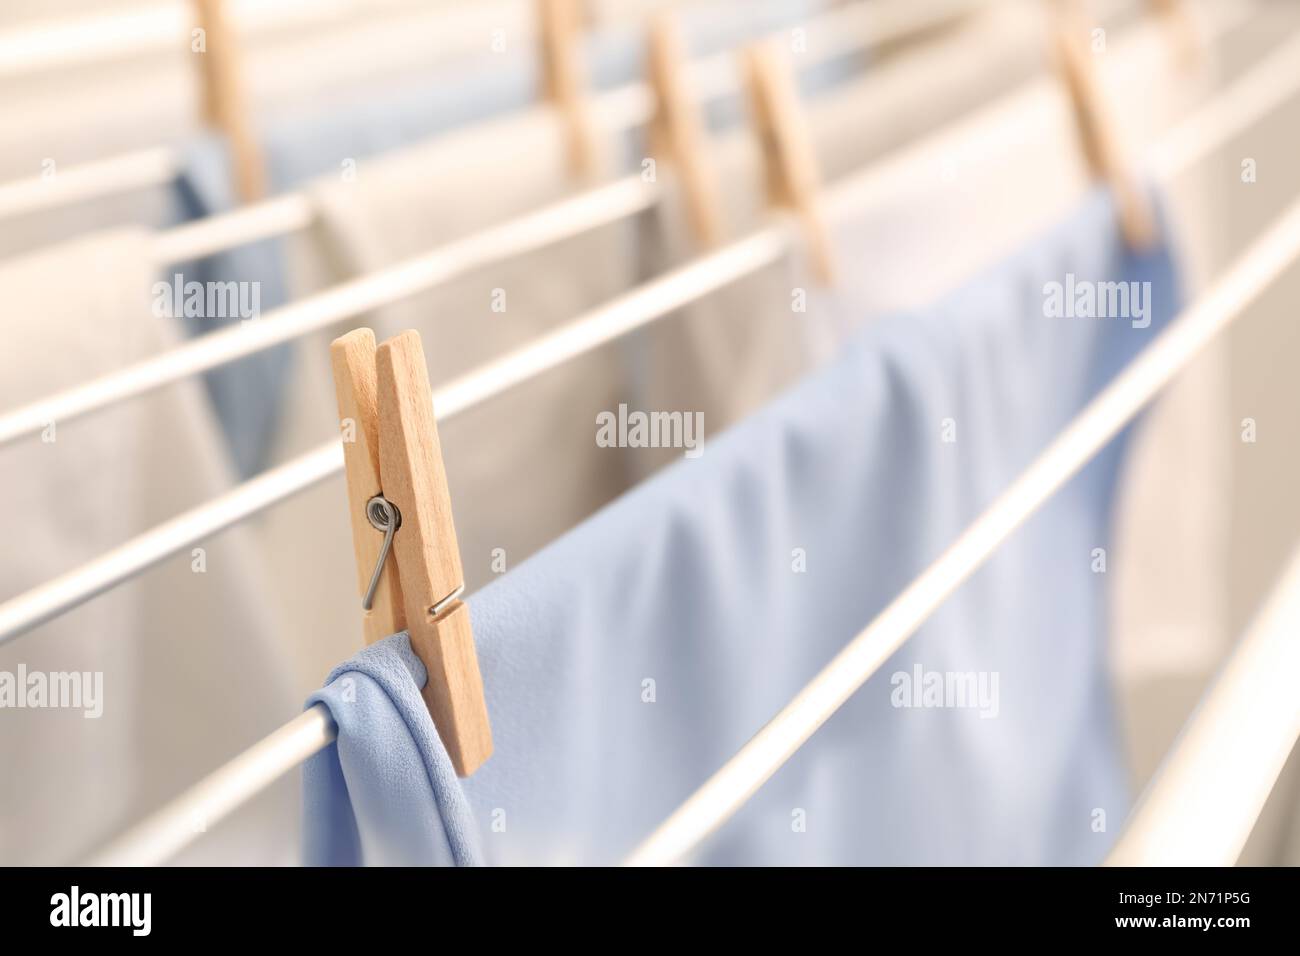 Clean laundry hanging on drying rack, closeup Stock Photo